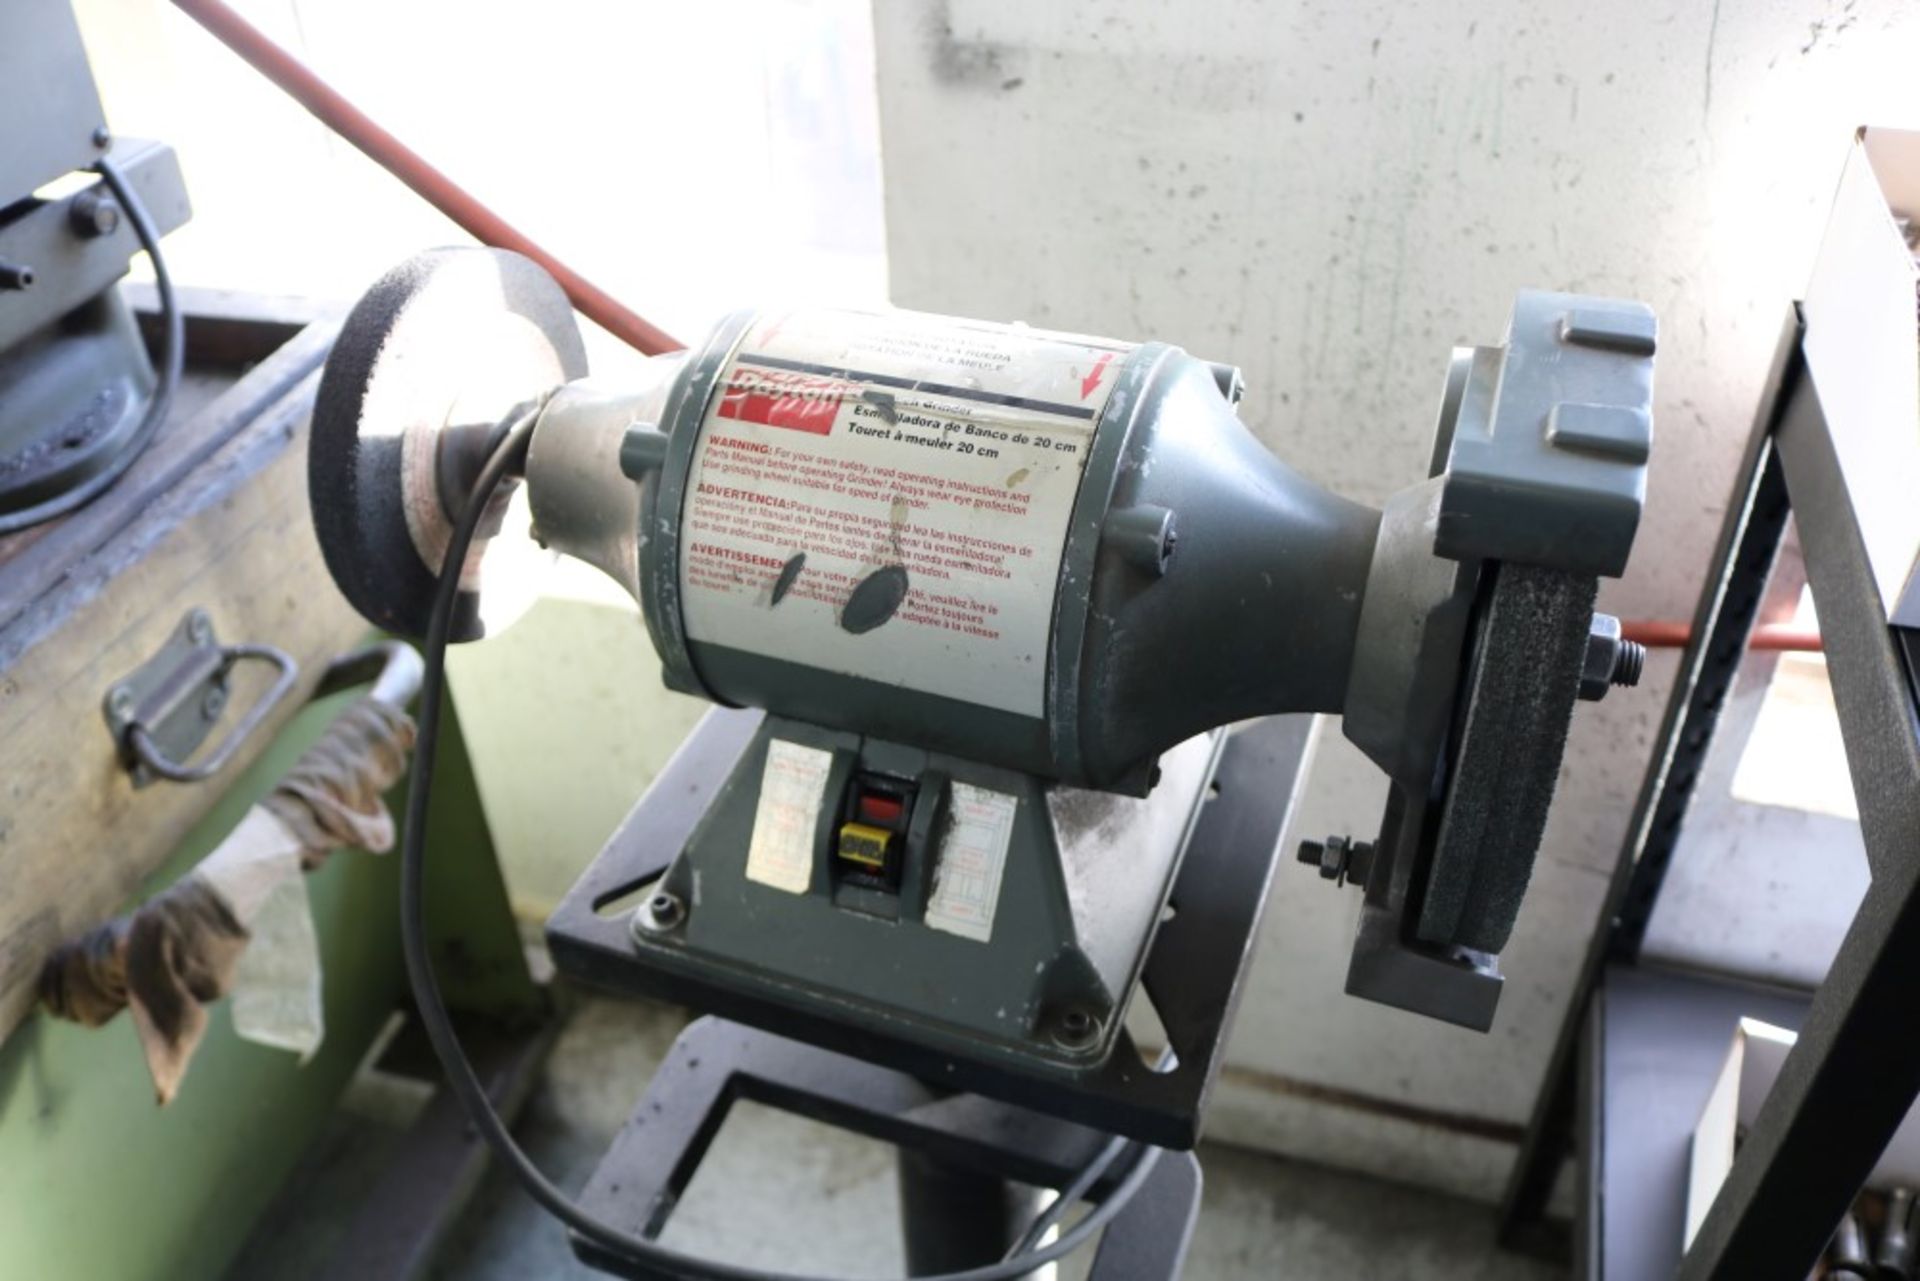 Dayton 8" Bench Grinder on Stand 3/4 HP, 3450 RPM - Image 2 of 5